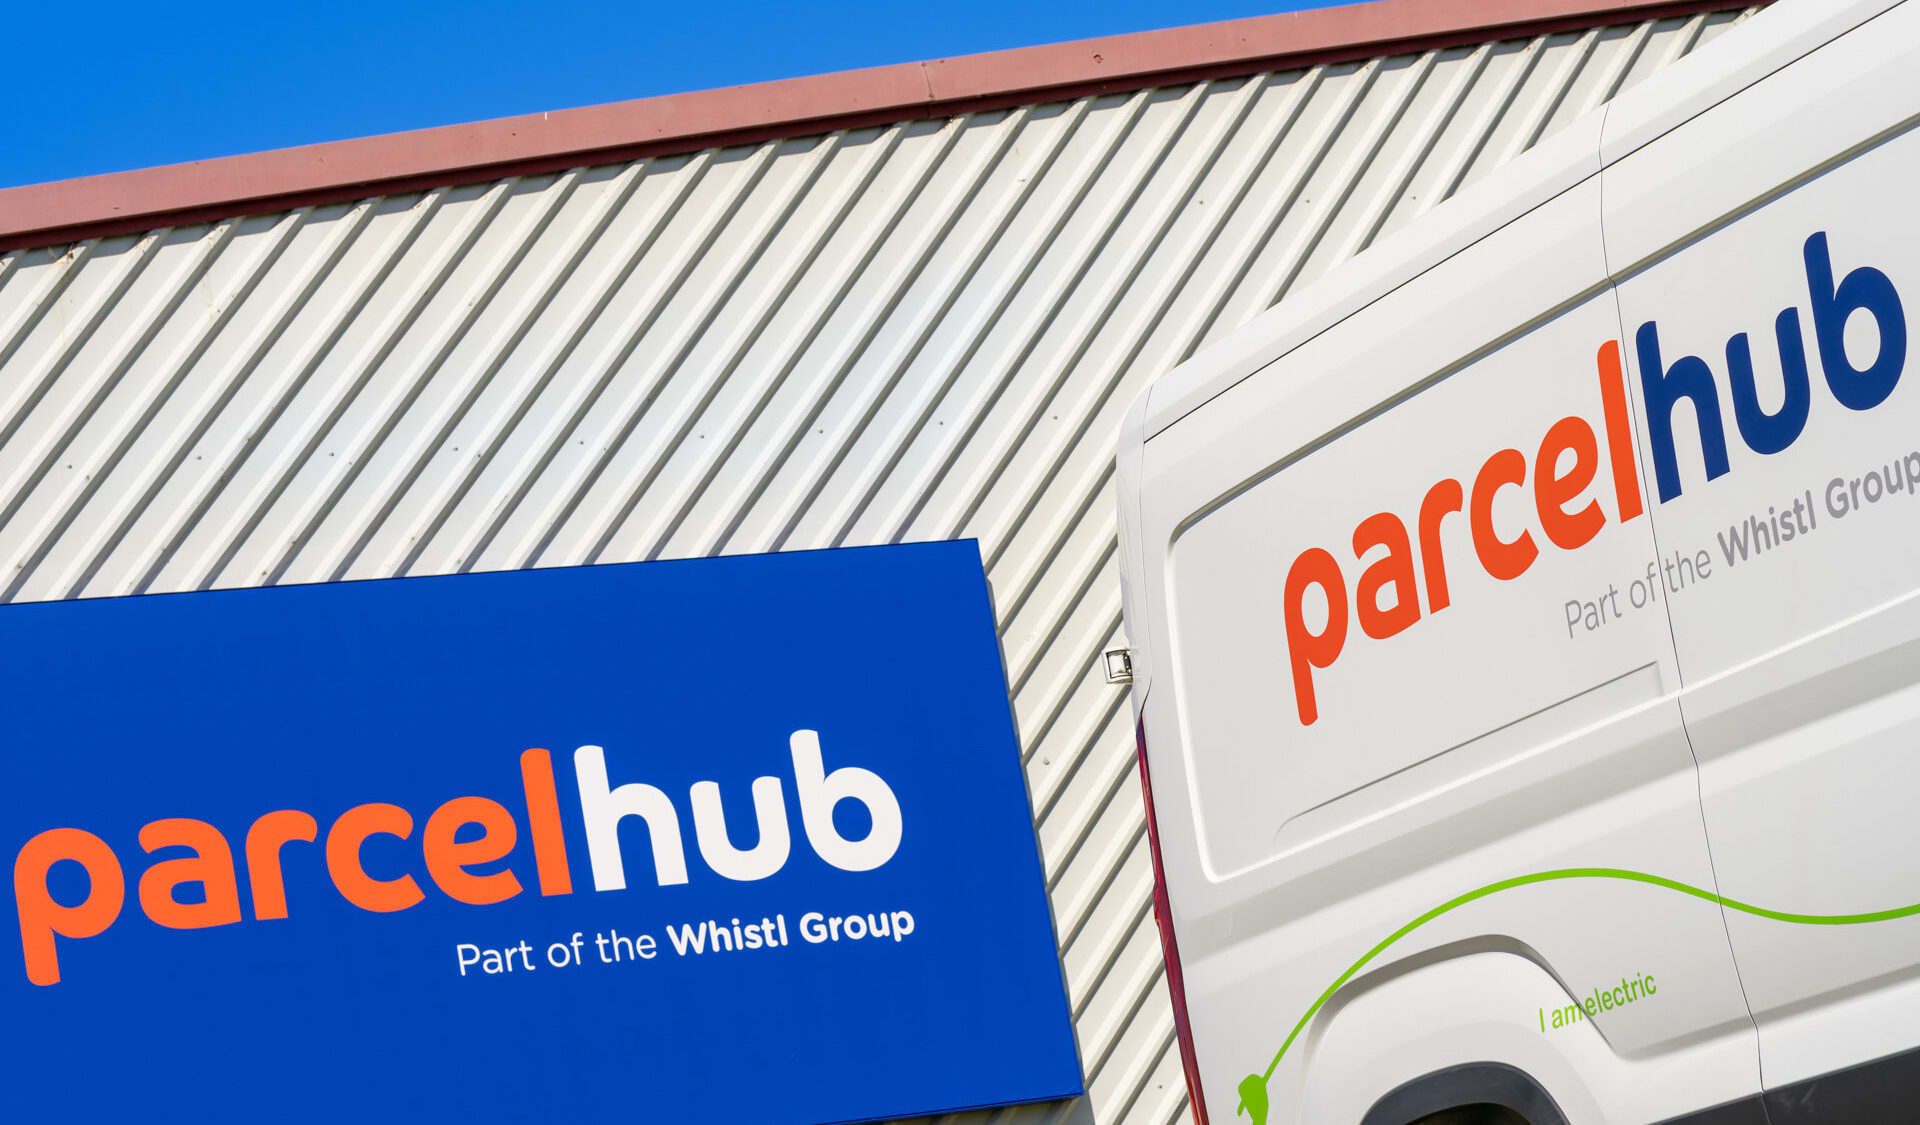 Parcelhub invests £450k in electric vans and infrastructure